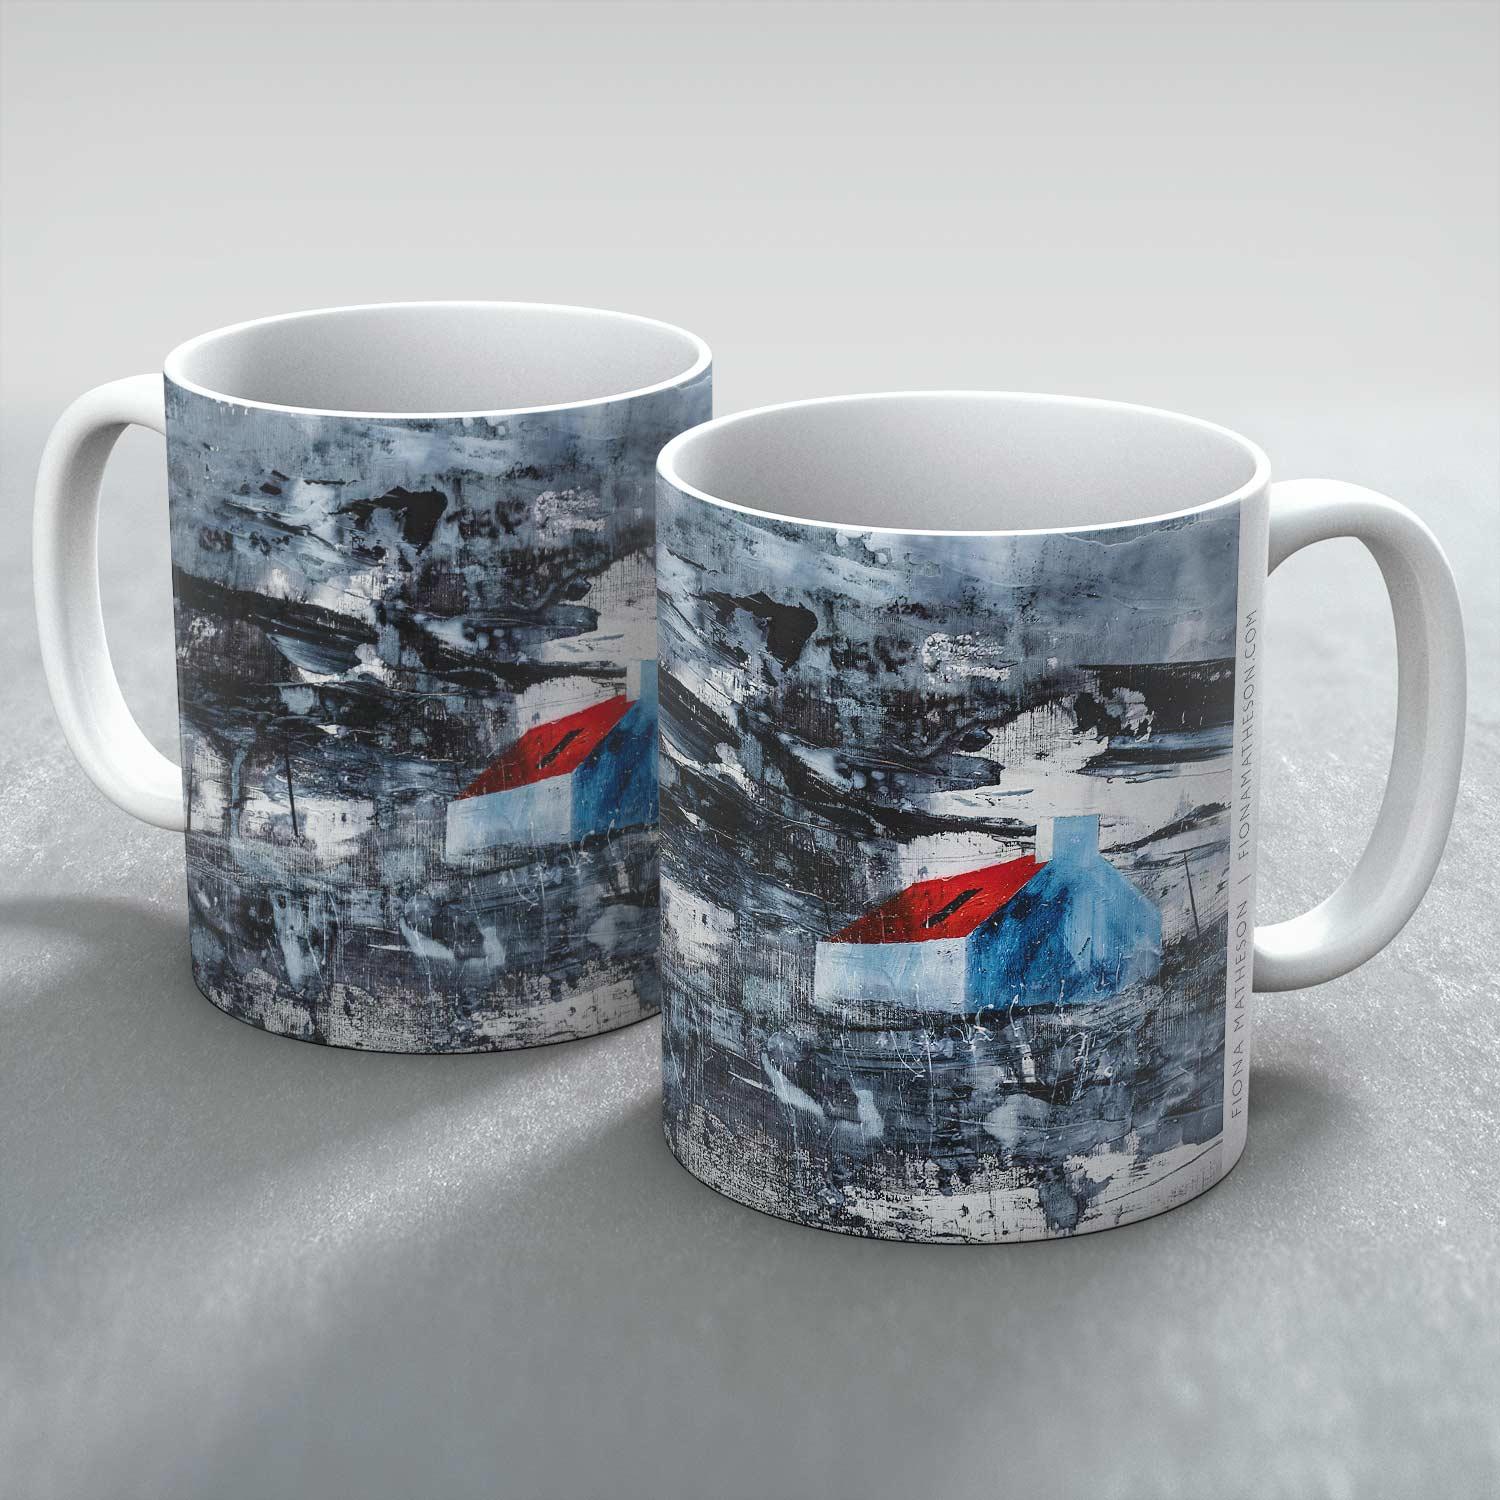 Blue Gable and Roof Light Mug from an original painting by artist Fiona Matheson